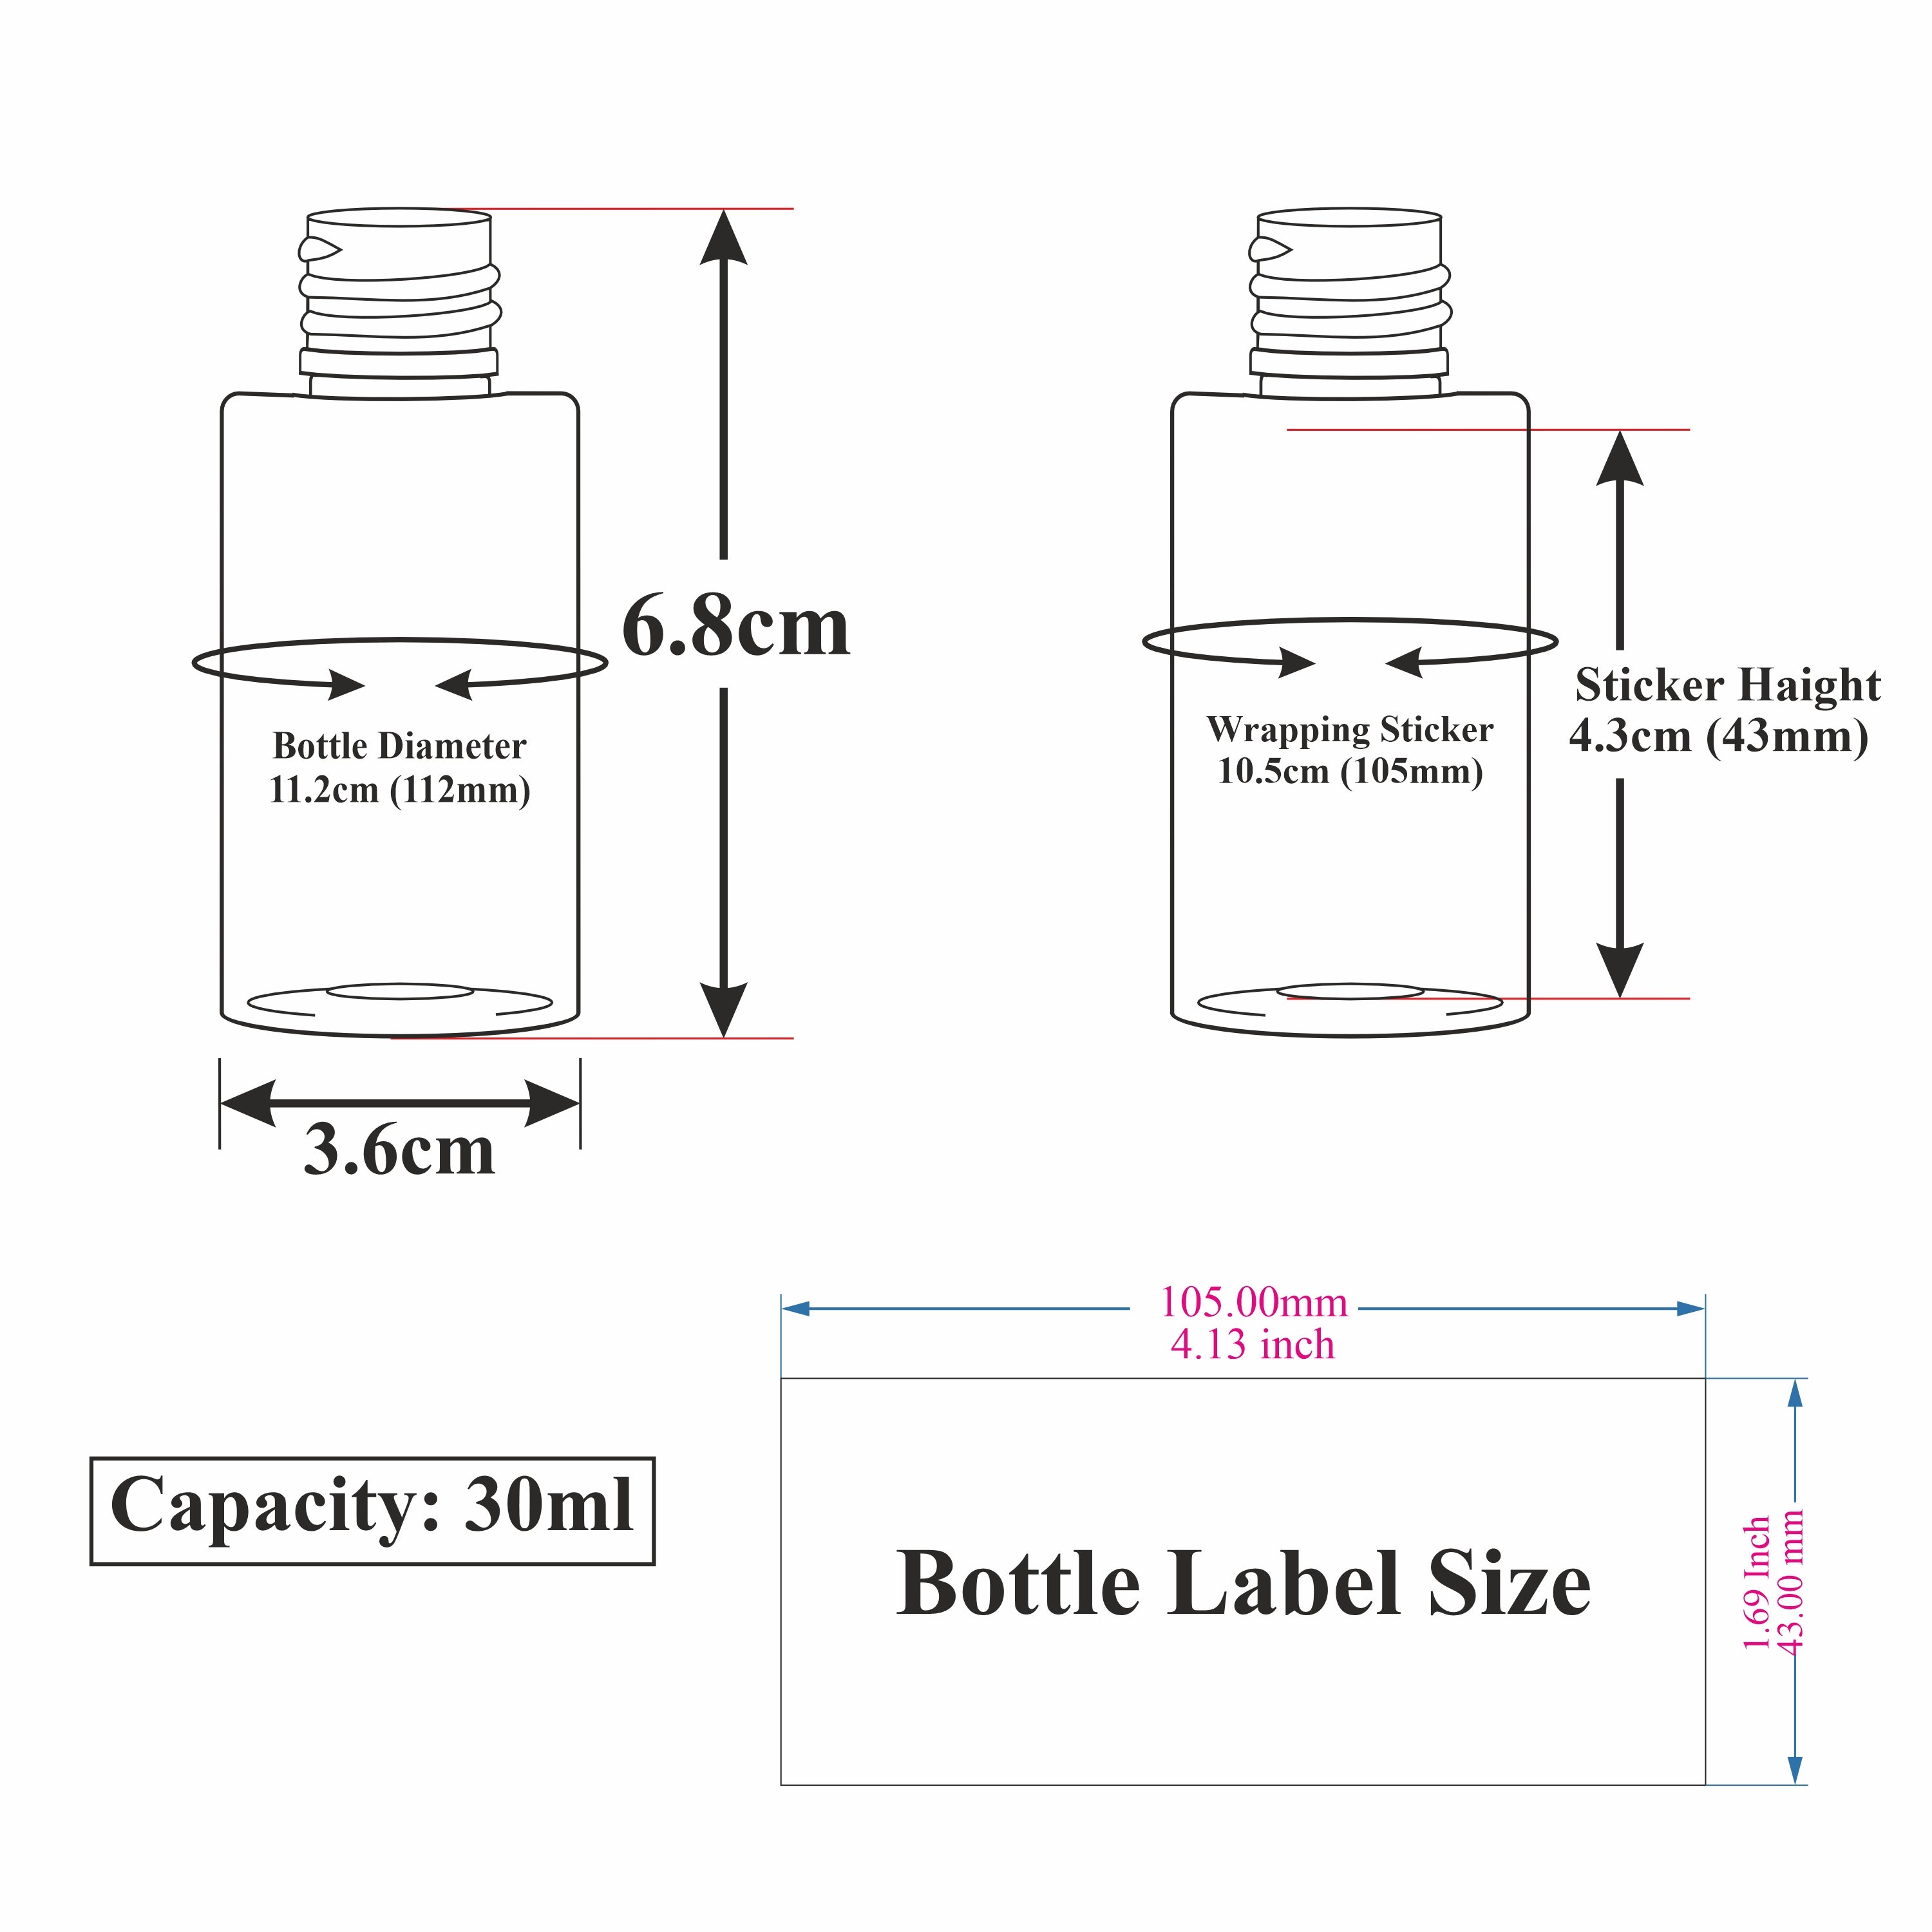 Frosted Glass Bottle With Golden Plated Black Mist Spray Pump 25ml, 30ml, 50ml, 100ml  [ZMG46]